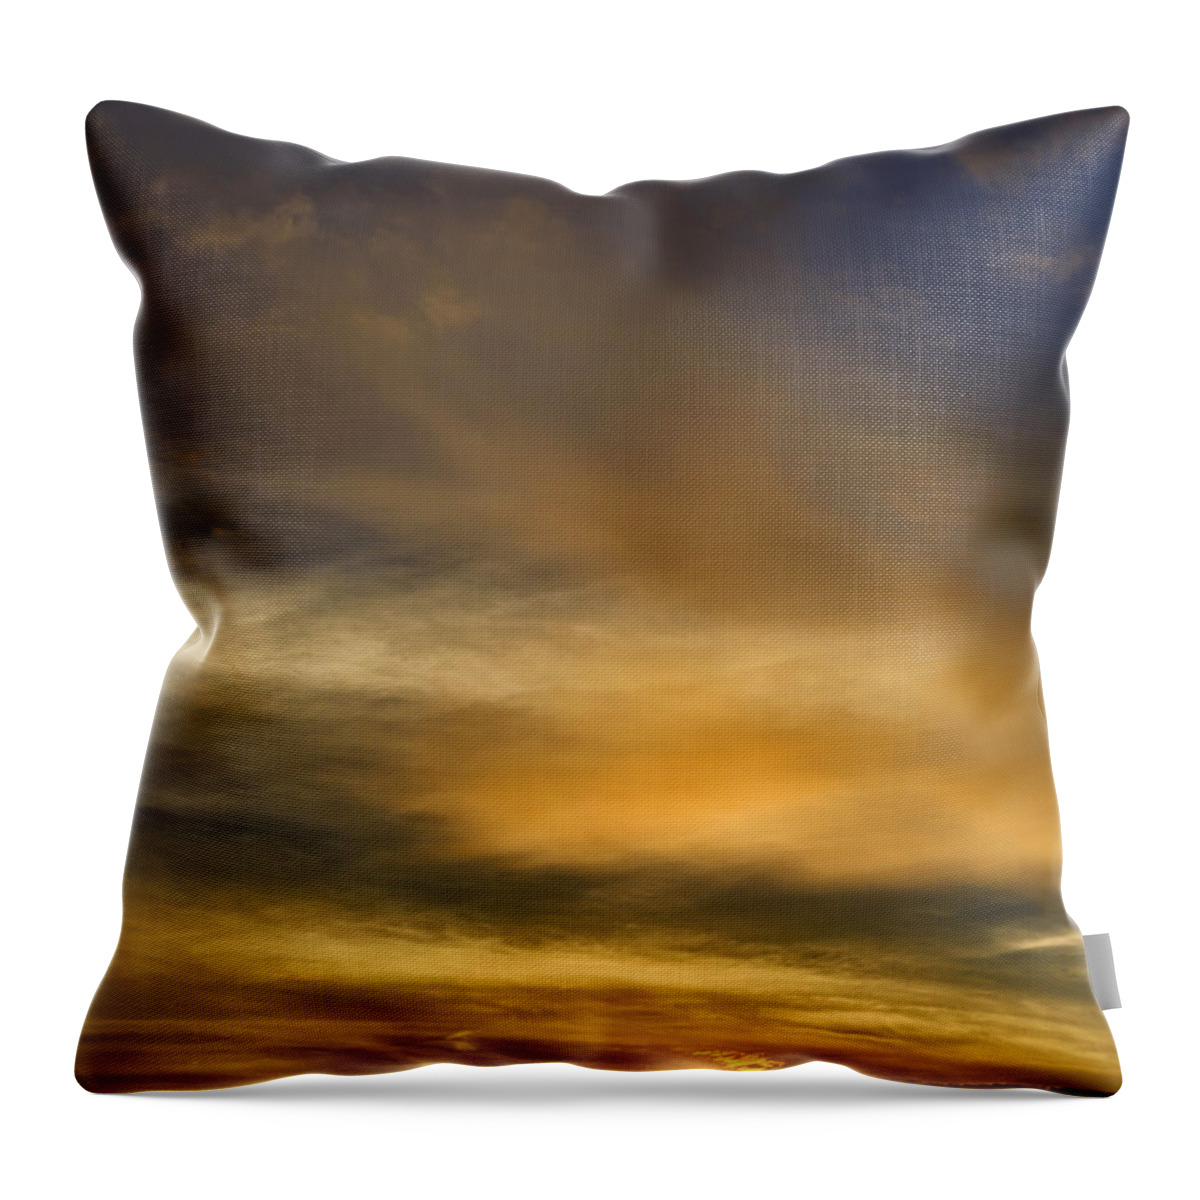 Pygmy Goat Throw Pillow featuring the photograph Pygmy Sunrise by Thomas R Fletcher